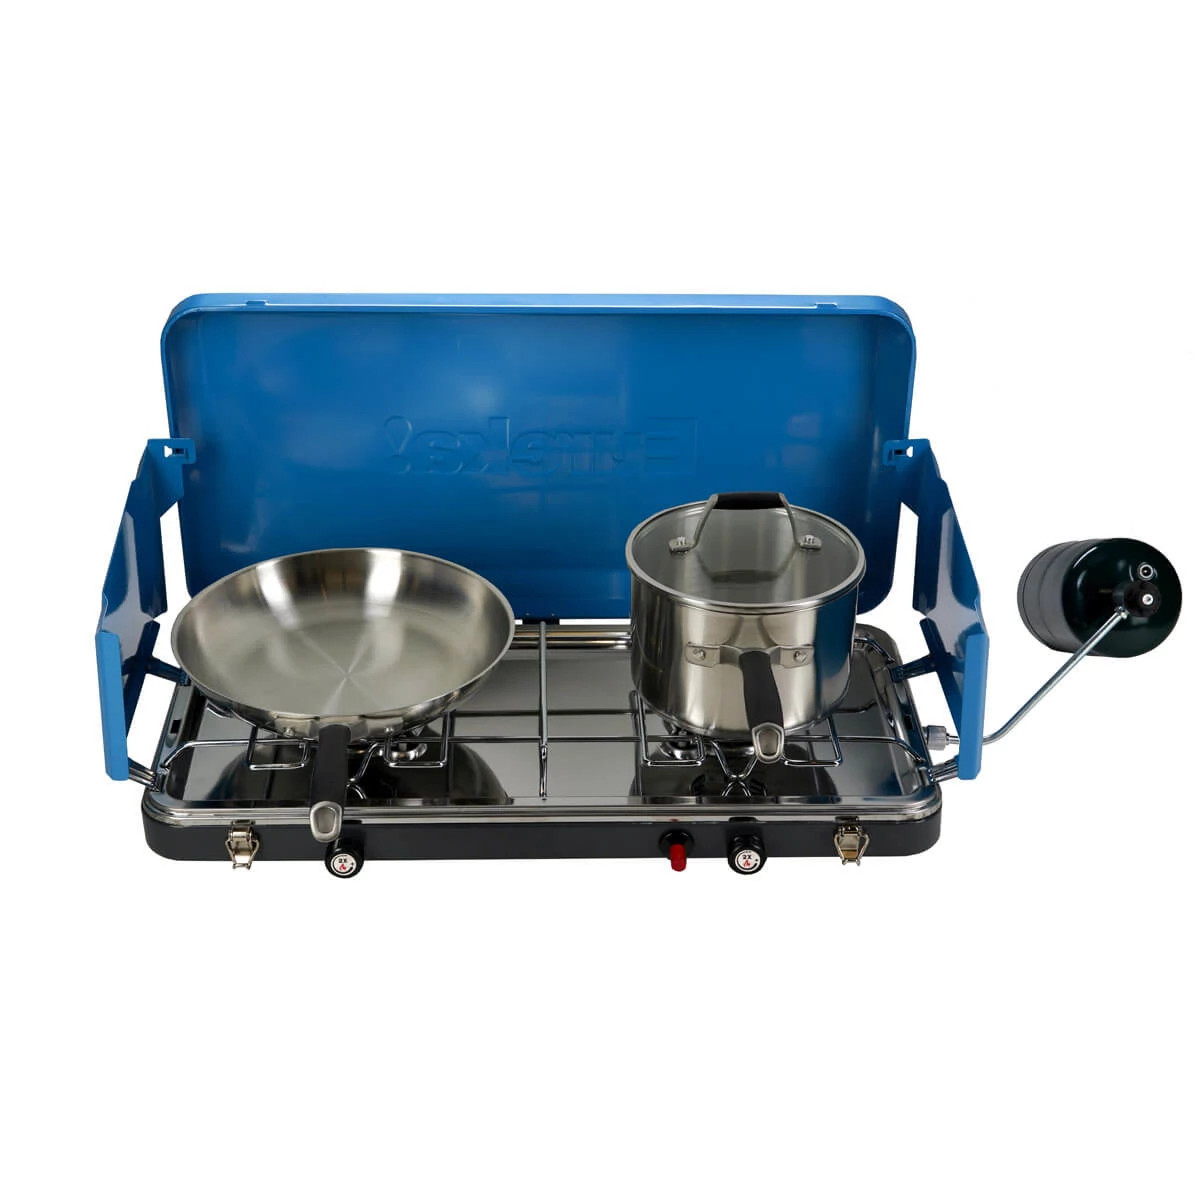 Camping stove. Outdoor Portable Stove.